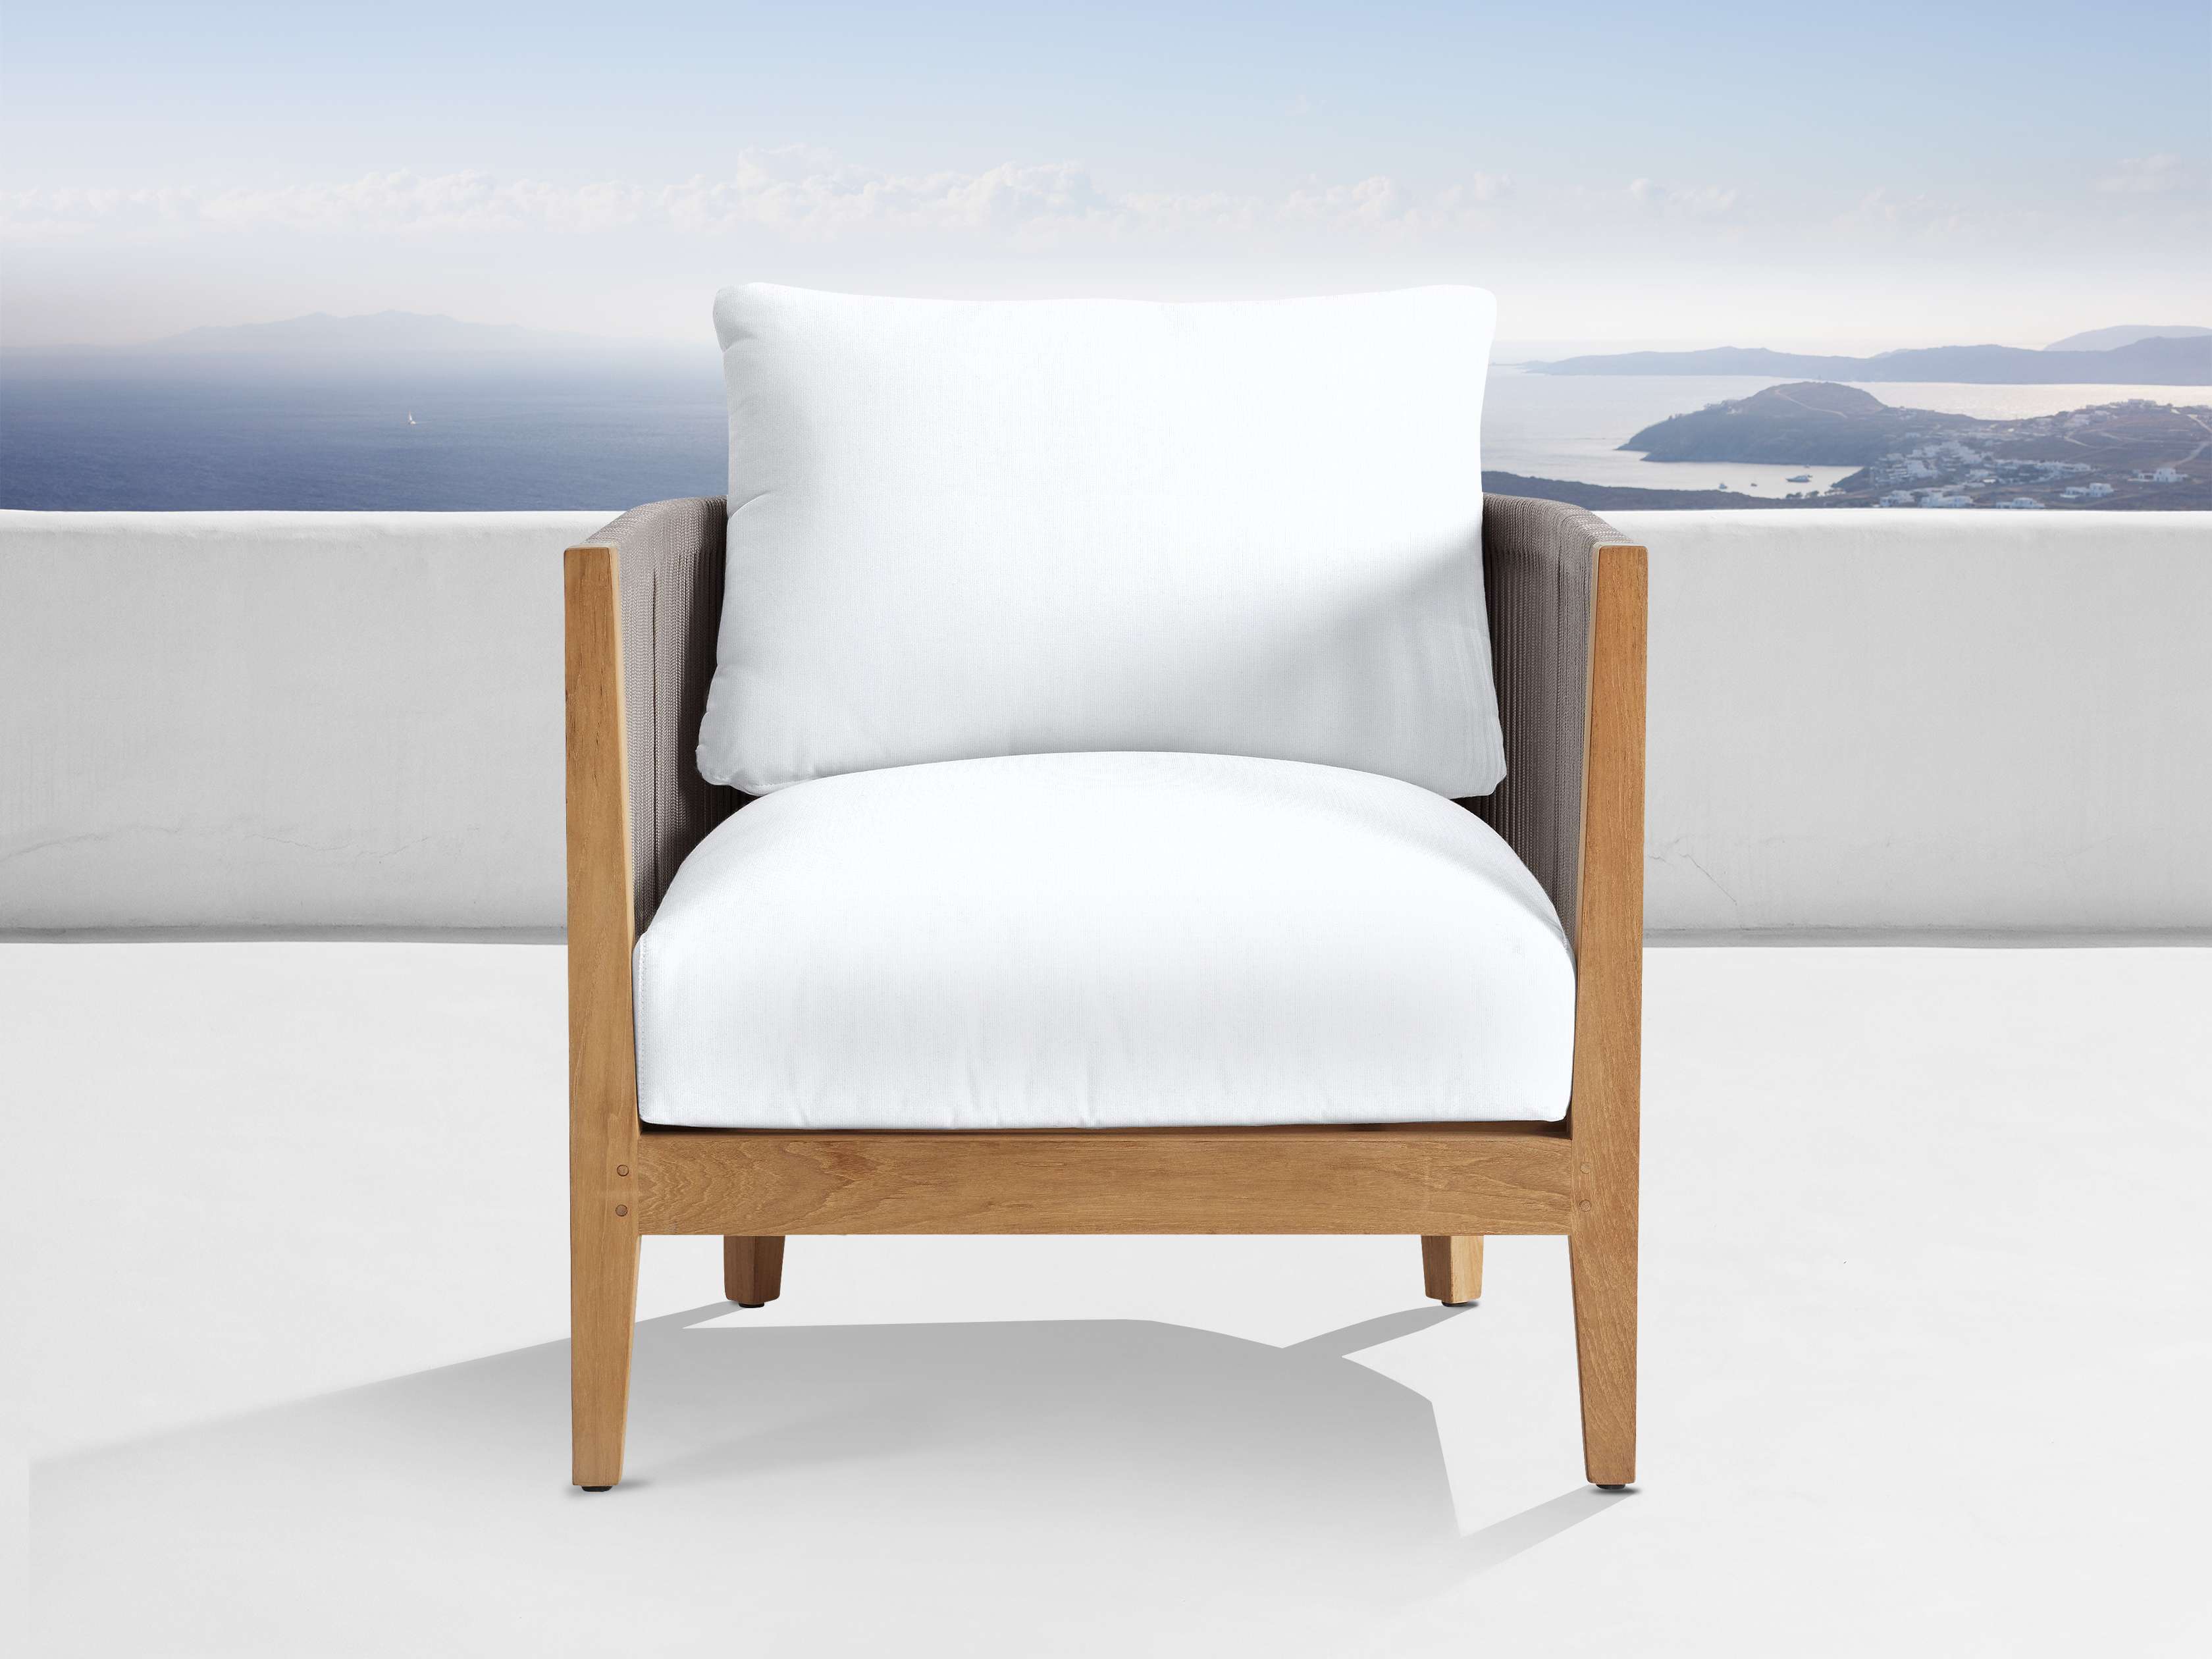 Shop Newport Outdoor Lounge Chair; QTY: 1; Color Any One of These: Maritime Snow, Ancona Linen, Shardai Zinc, Chic Linen, Granville Parchment from Arhaus on Openhaus